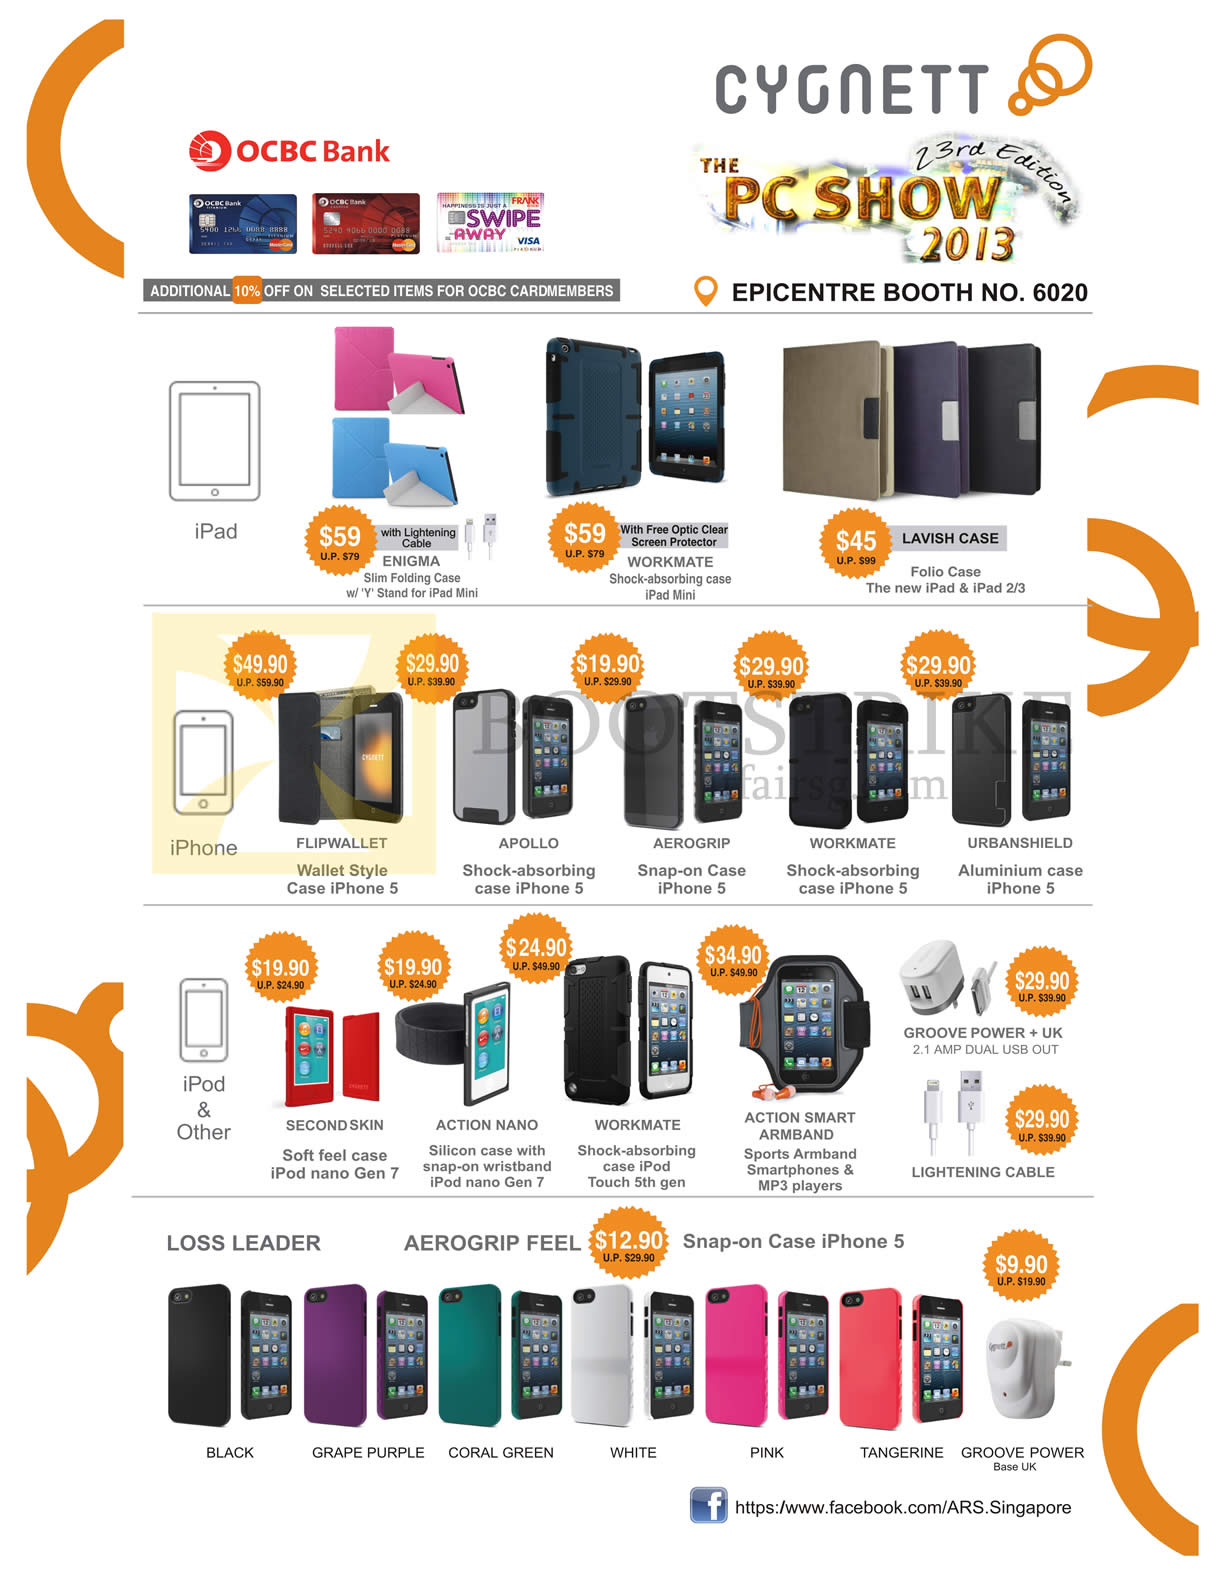 PC SHOW 2013 price list image brochure of Epicentre Cygnett IPad Cases, IPhone, IPod, Groove Power, Cables